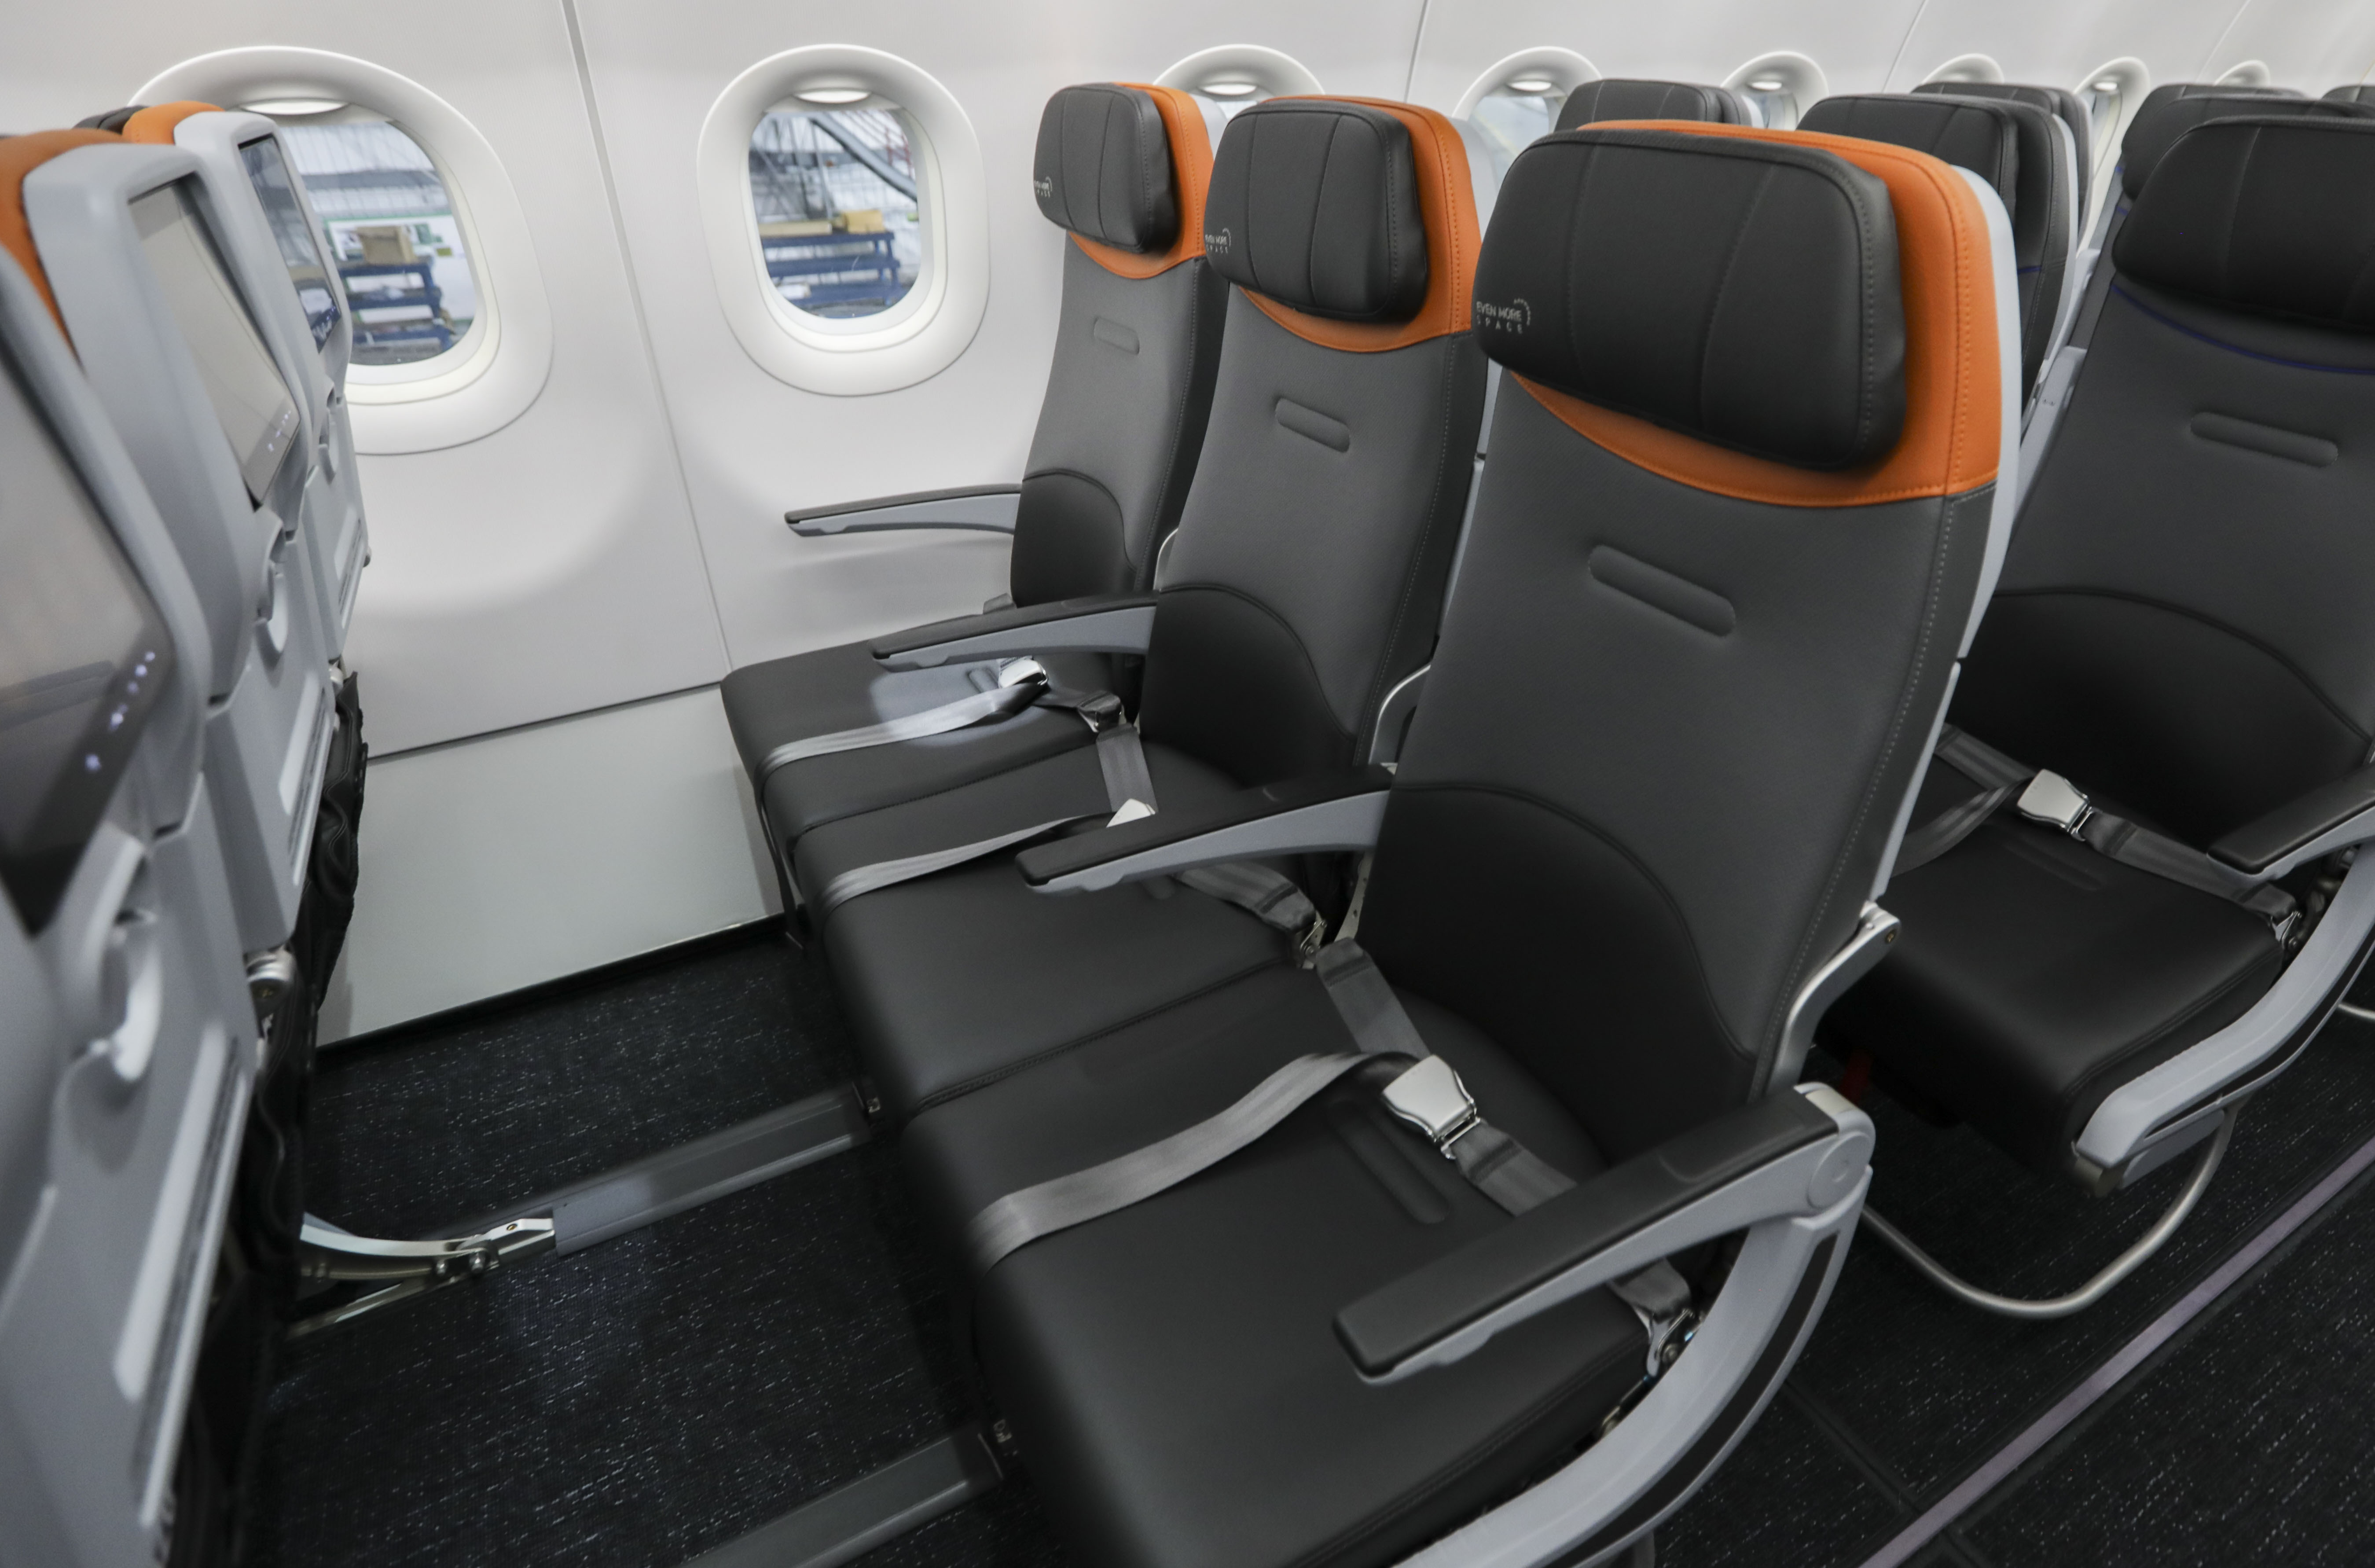 The Meridian seatfrom Collins Aerospace is being fitted to the 2019 JetBlue A320 cabins